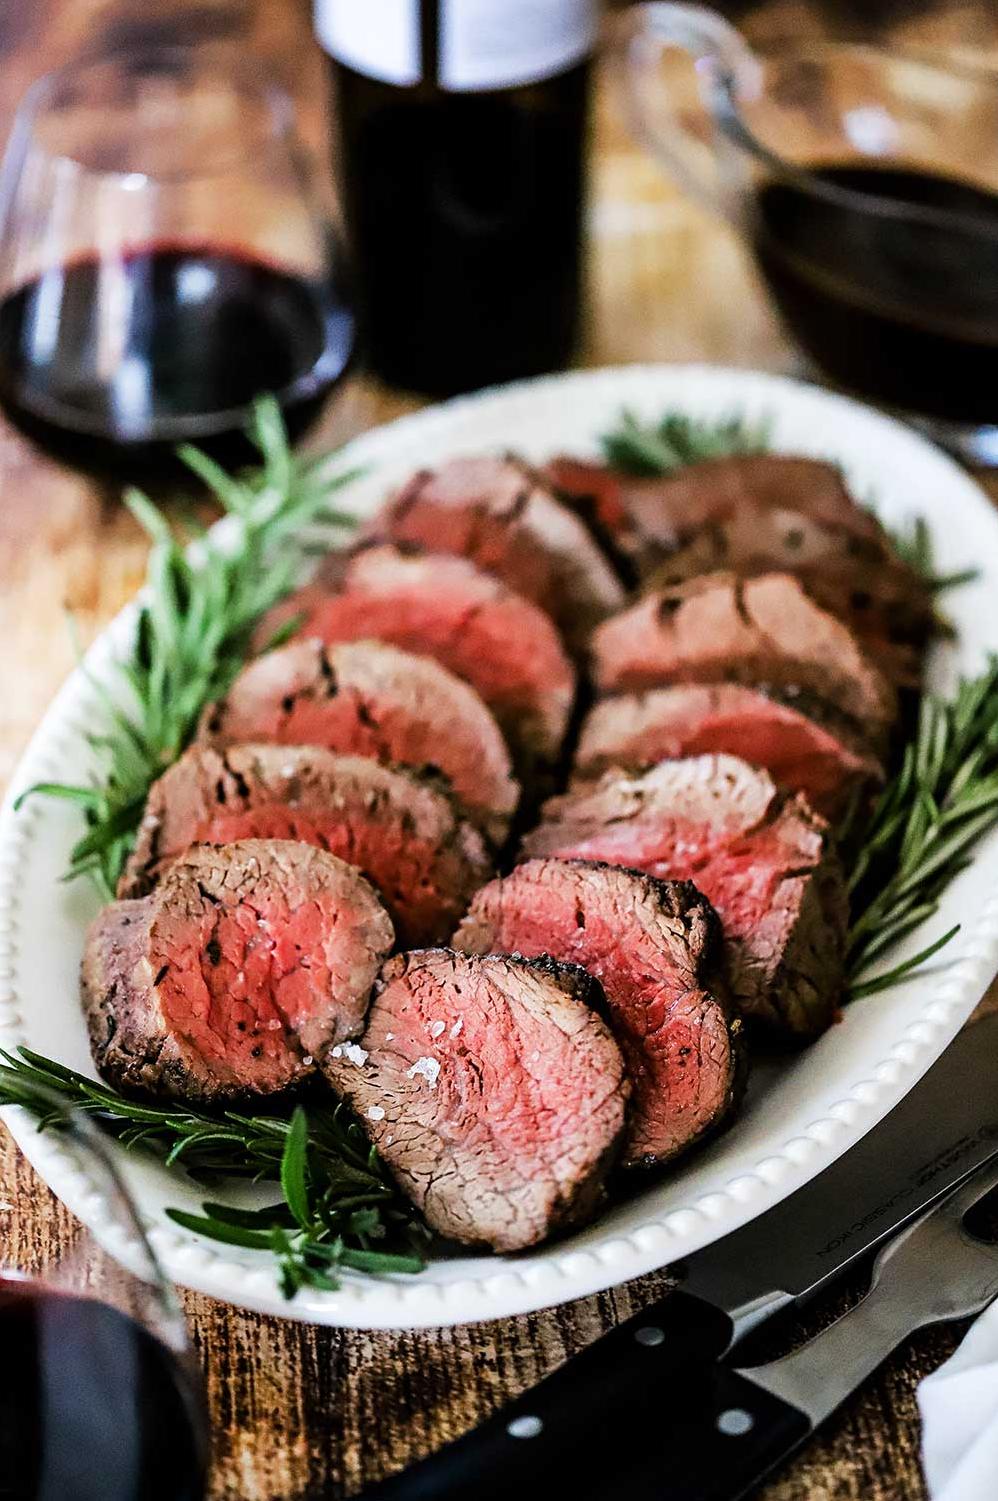  Savor every bite of this melt-in-your-mouth beef tenderloin.